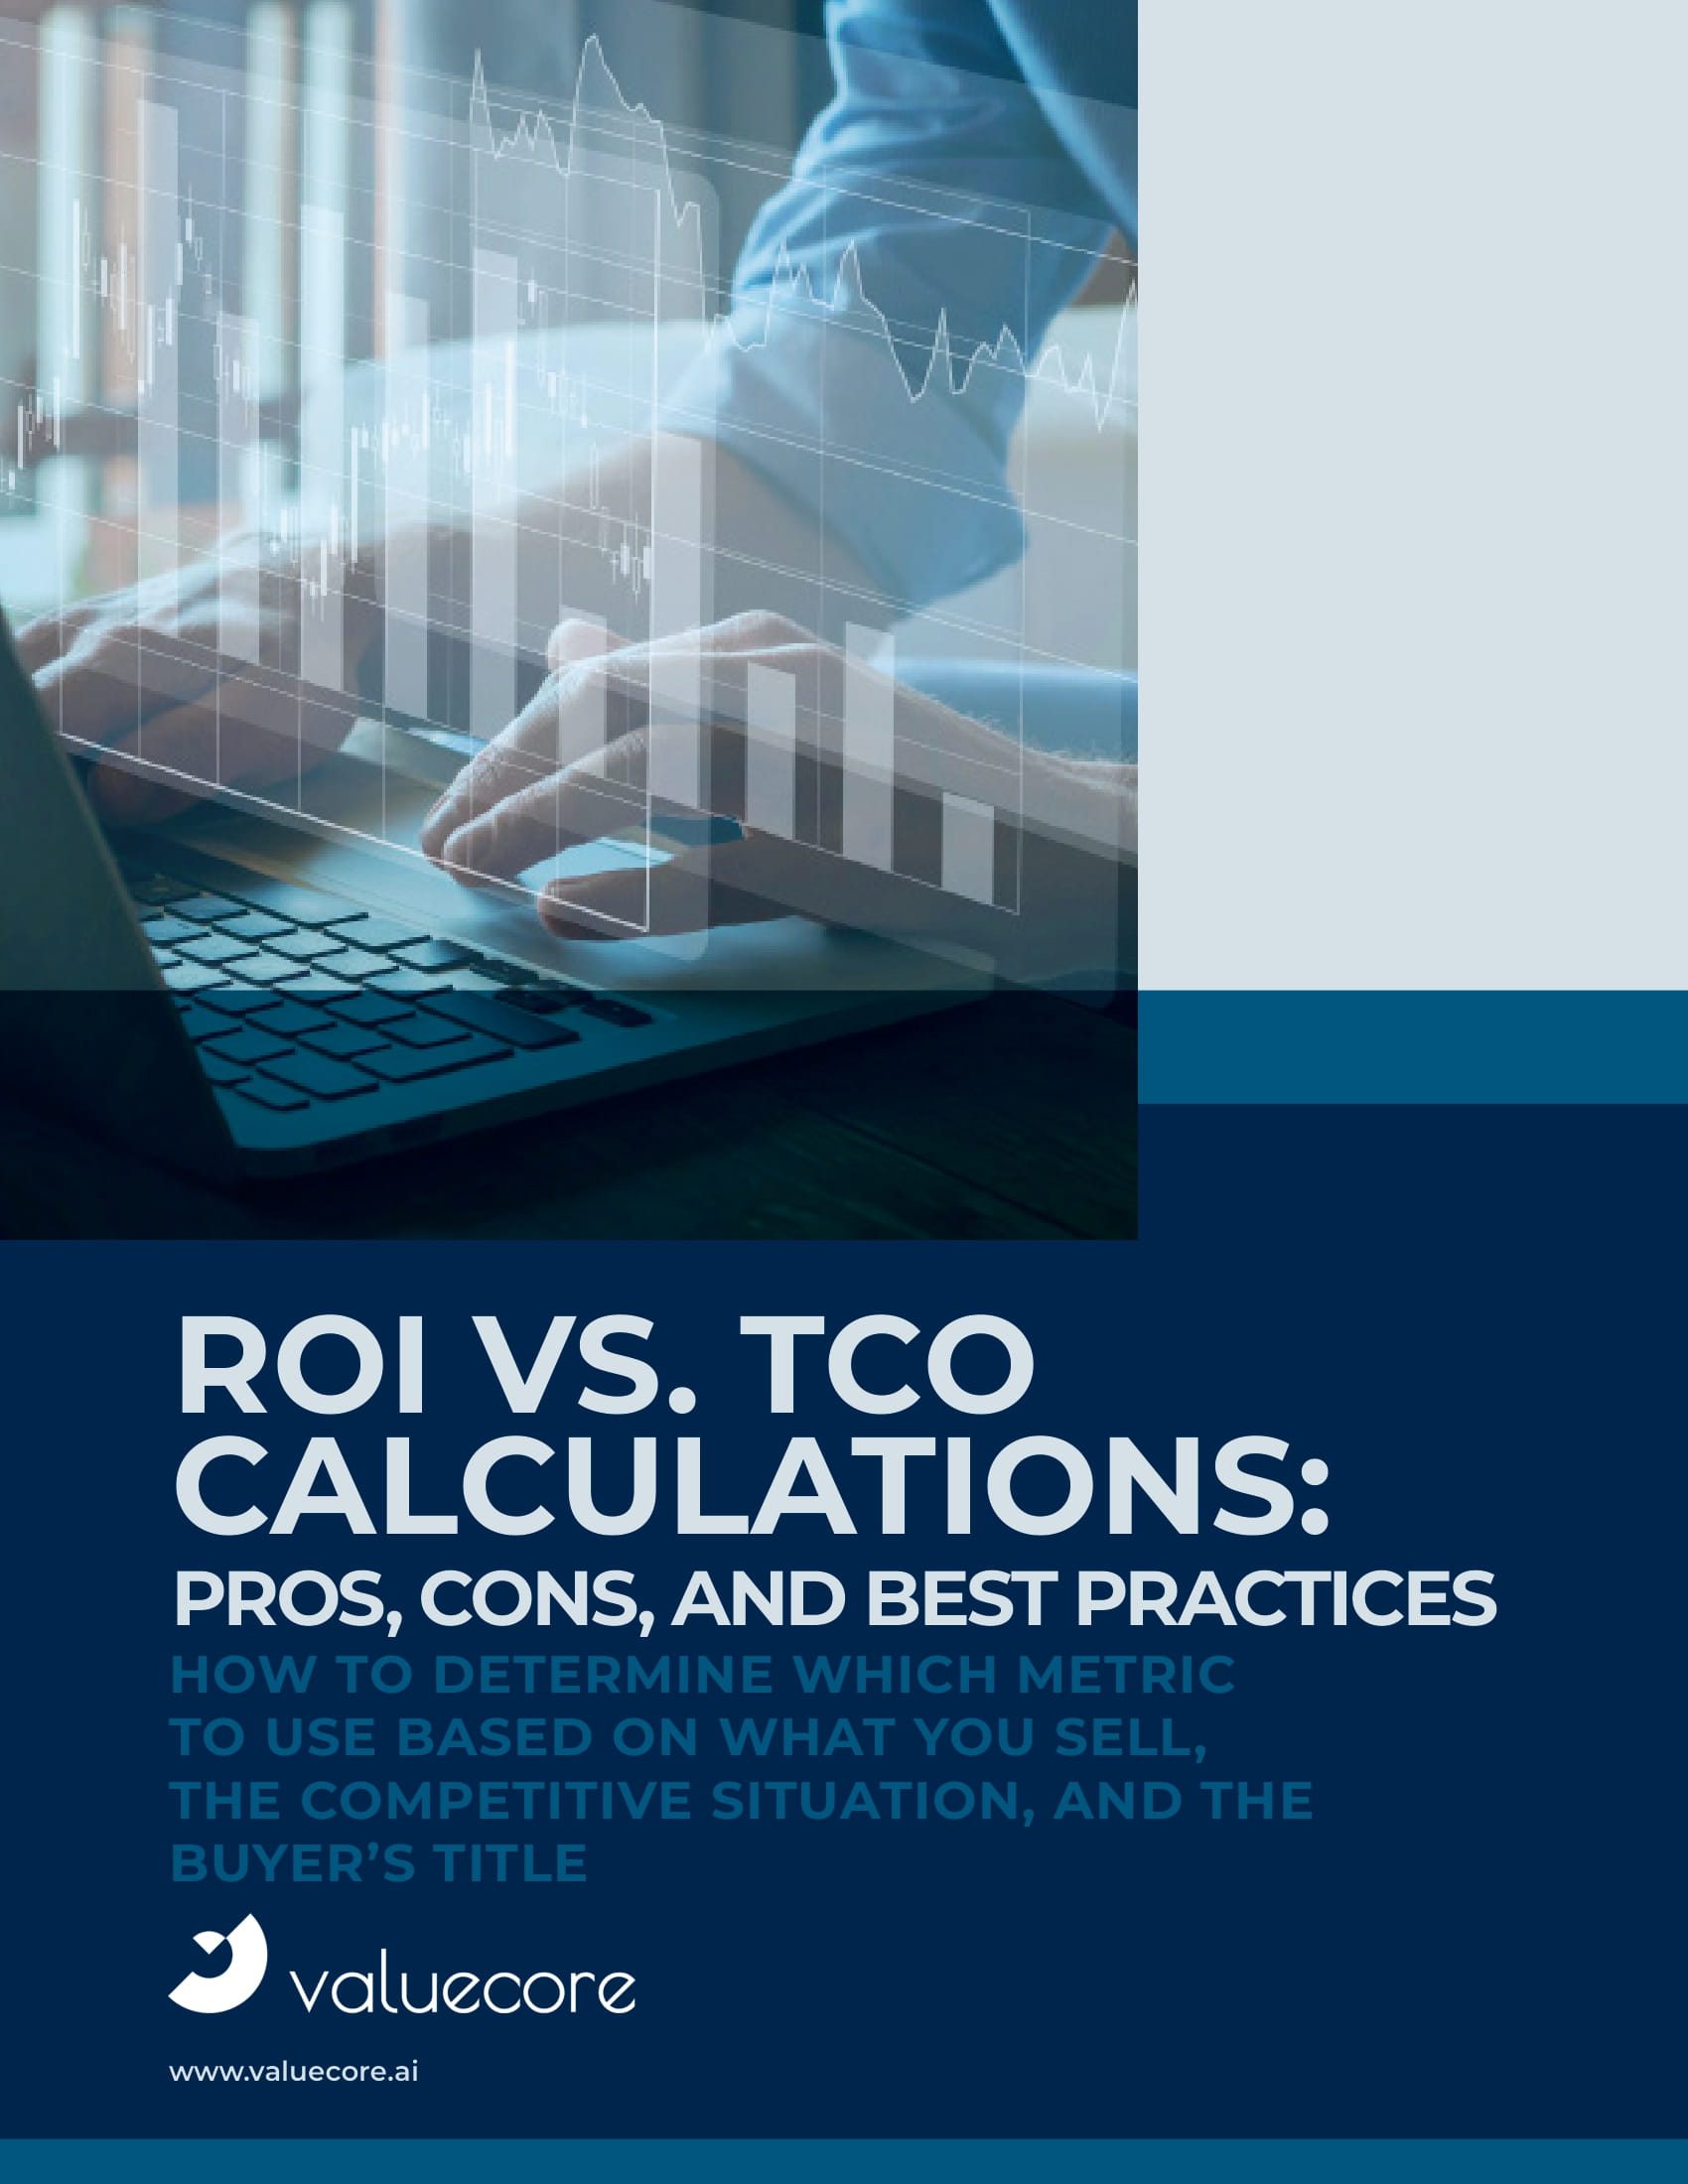 Image for <b>eBook: ROI vs TCO Calculations - Pros and Cons</b>